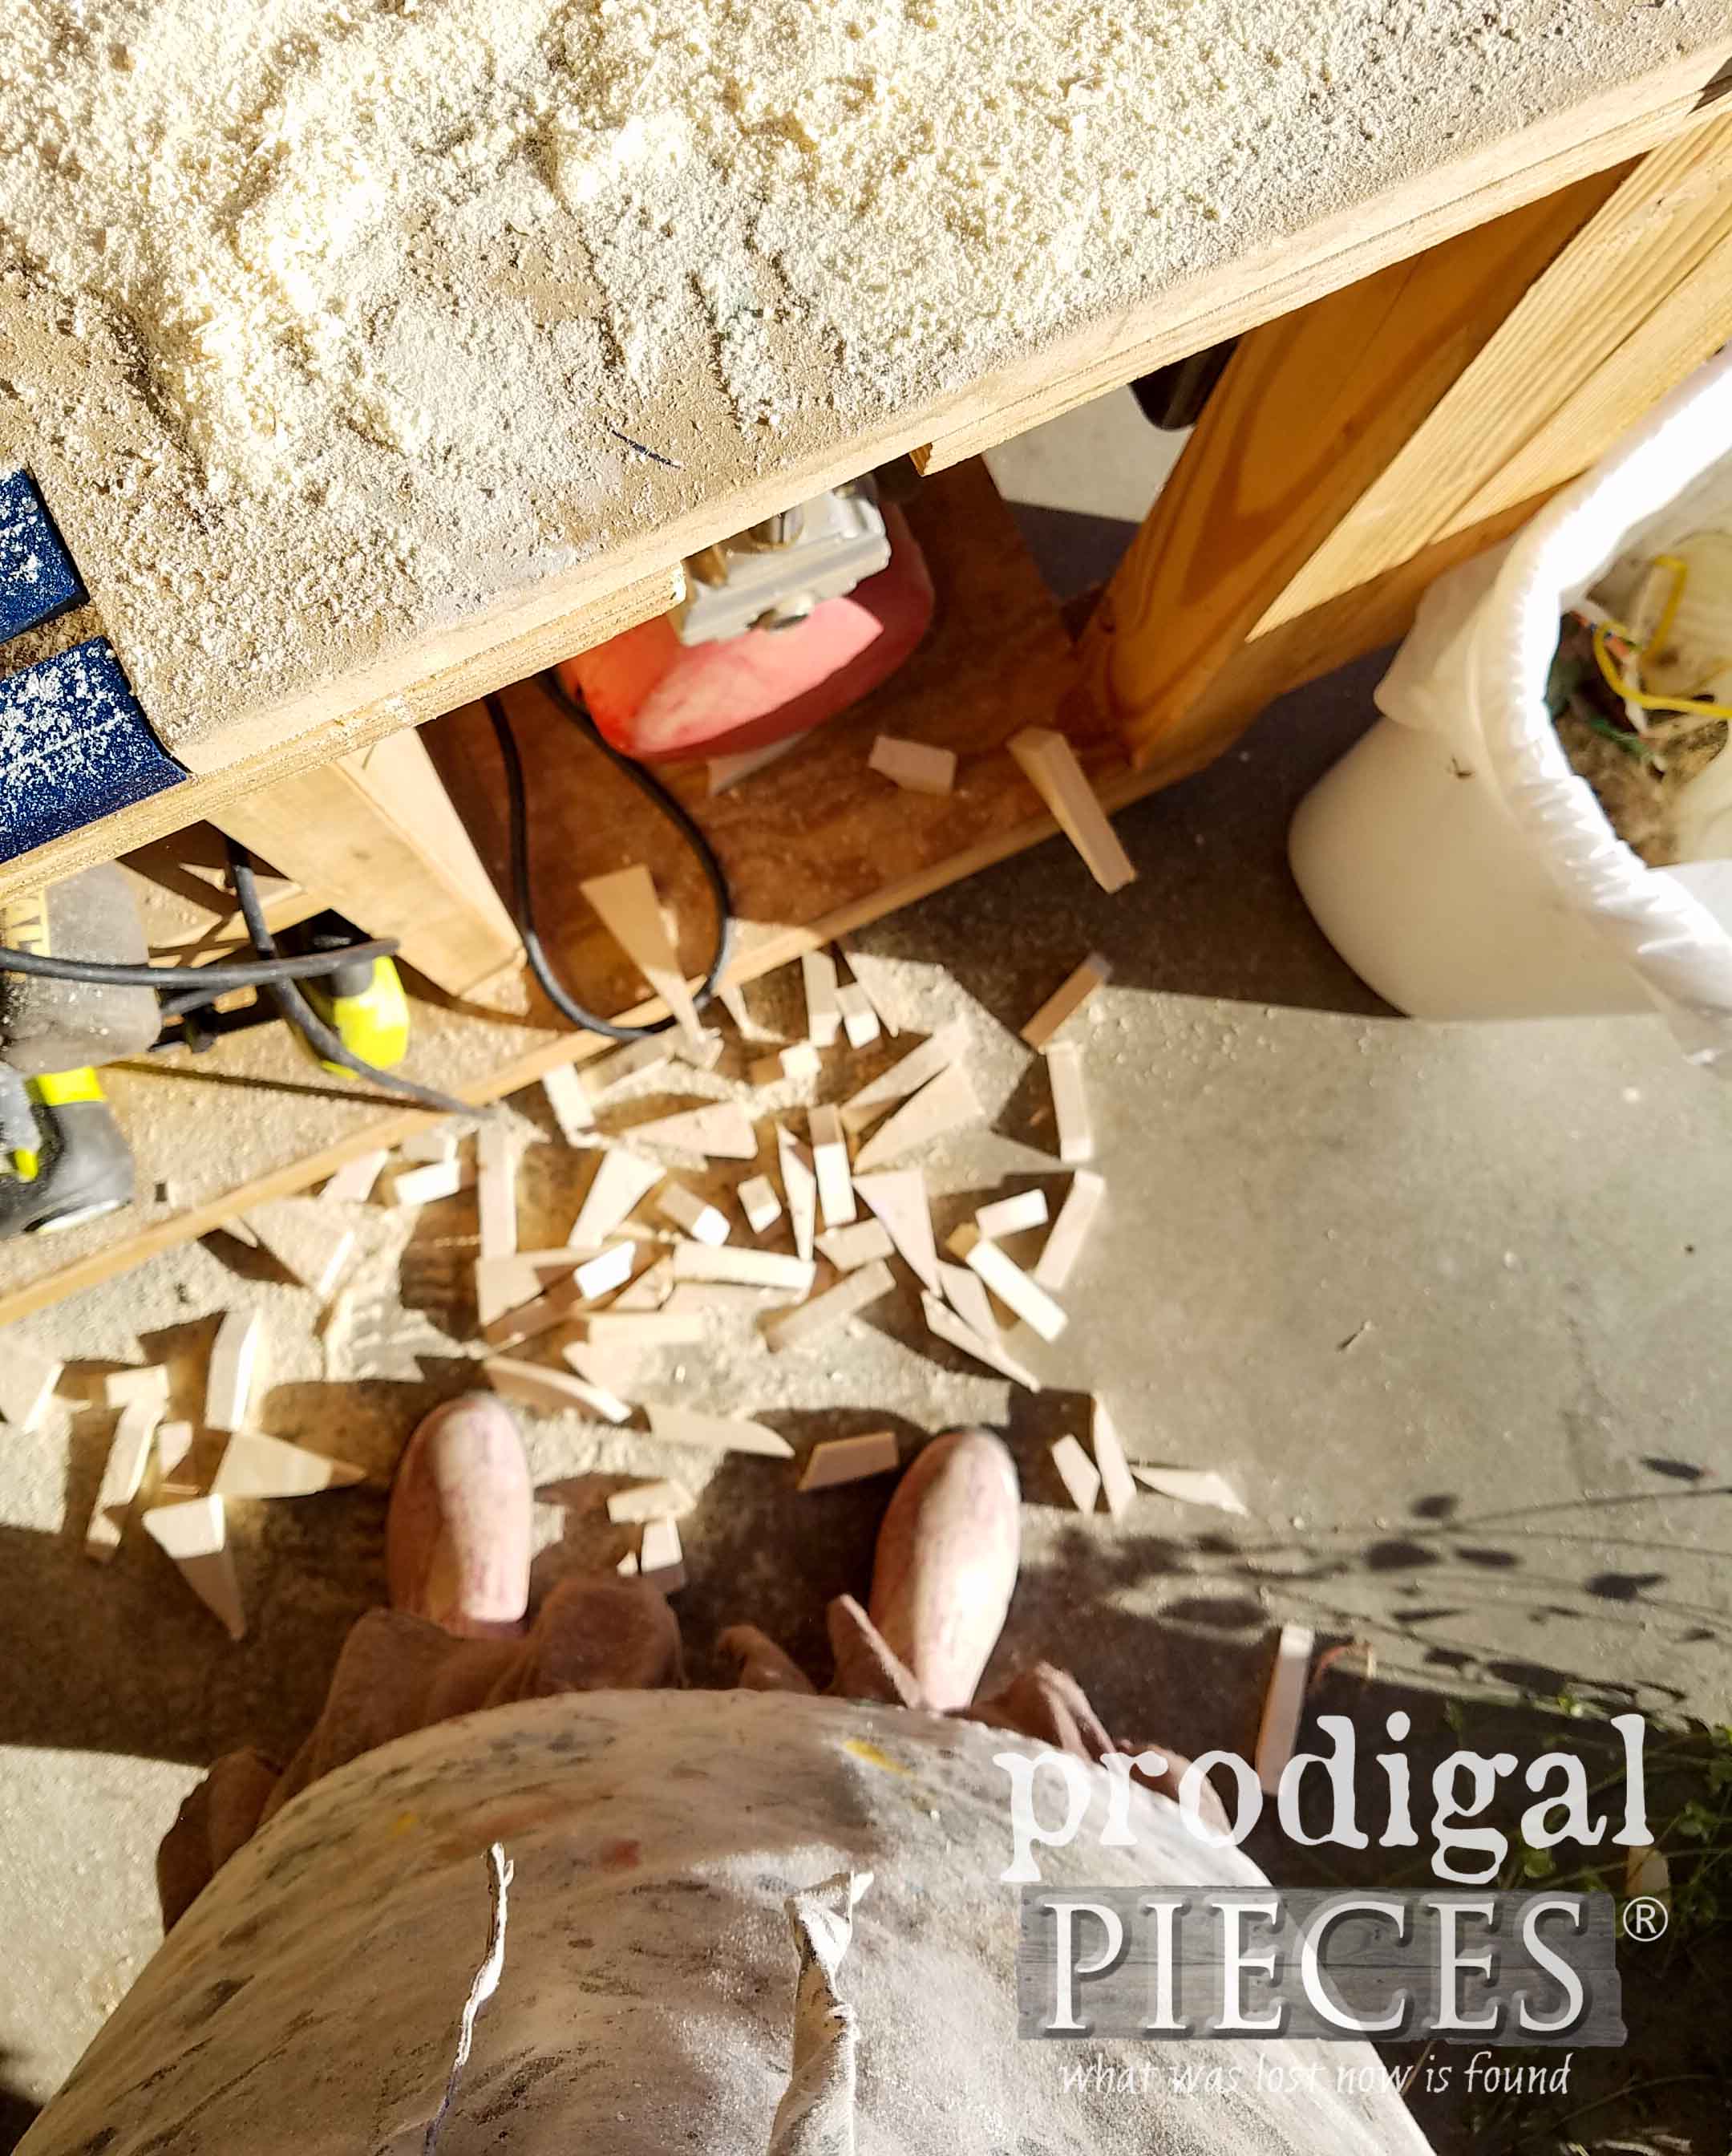 A beautiful mess of woodworking. Mmm... | prodigalpieces.com